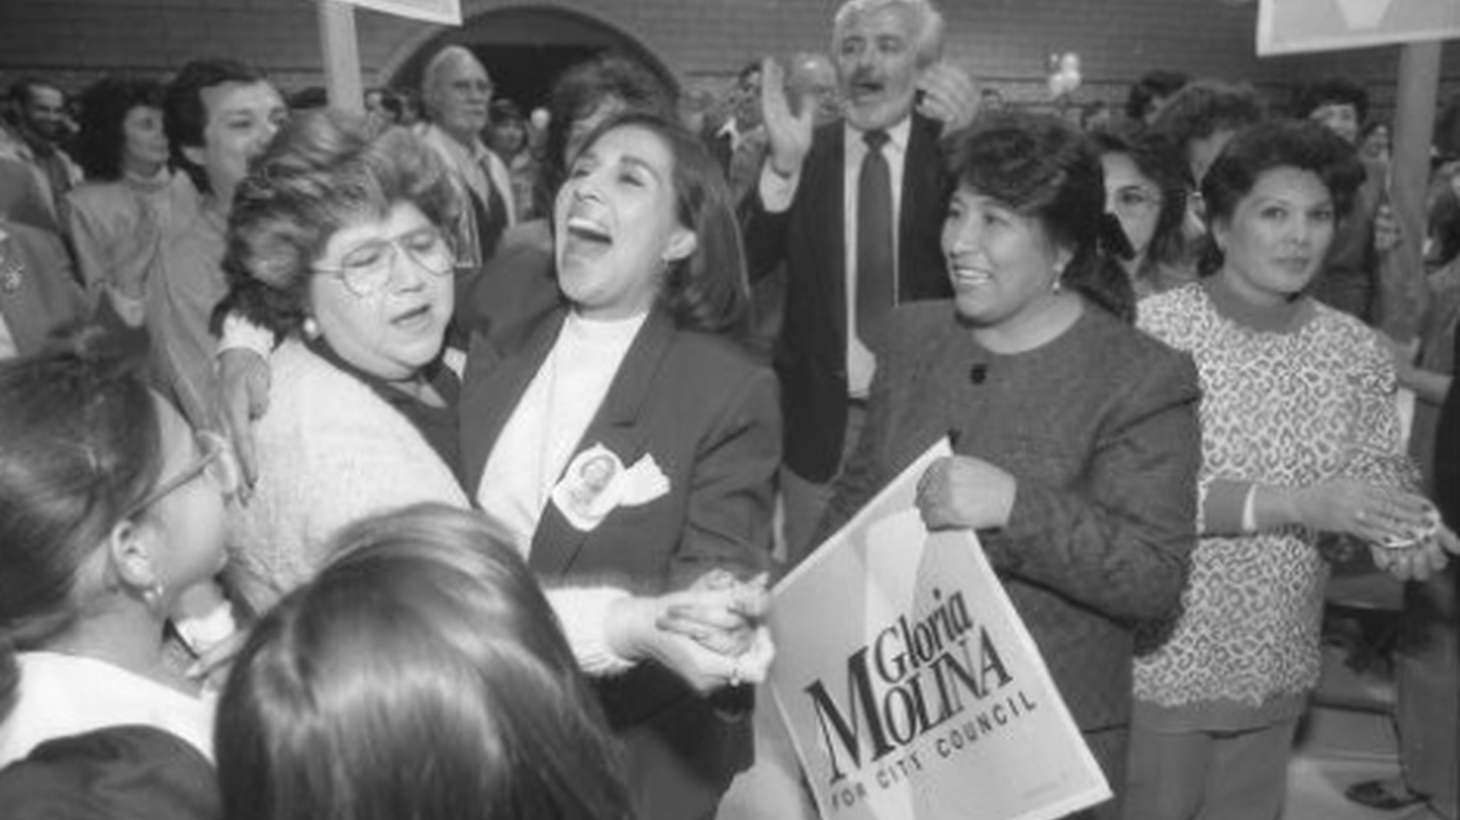 Gloria Molina and supporters celebrate after her City Council victory in Los Angeles, Calif., 1987.